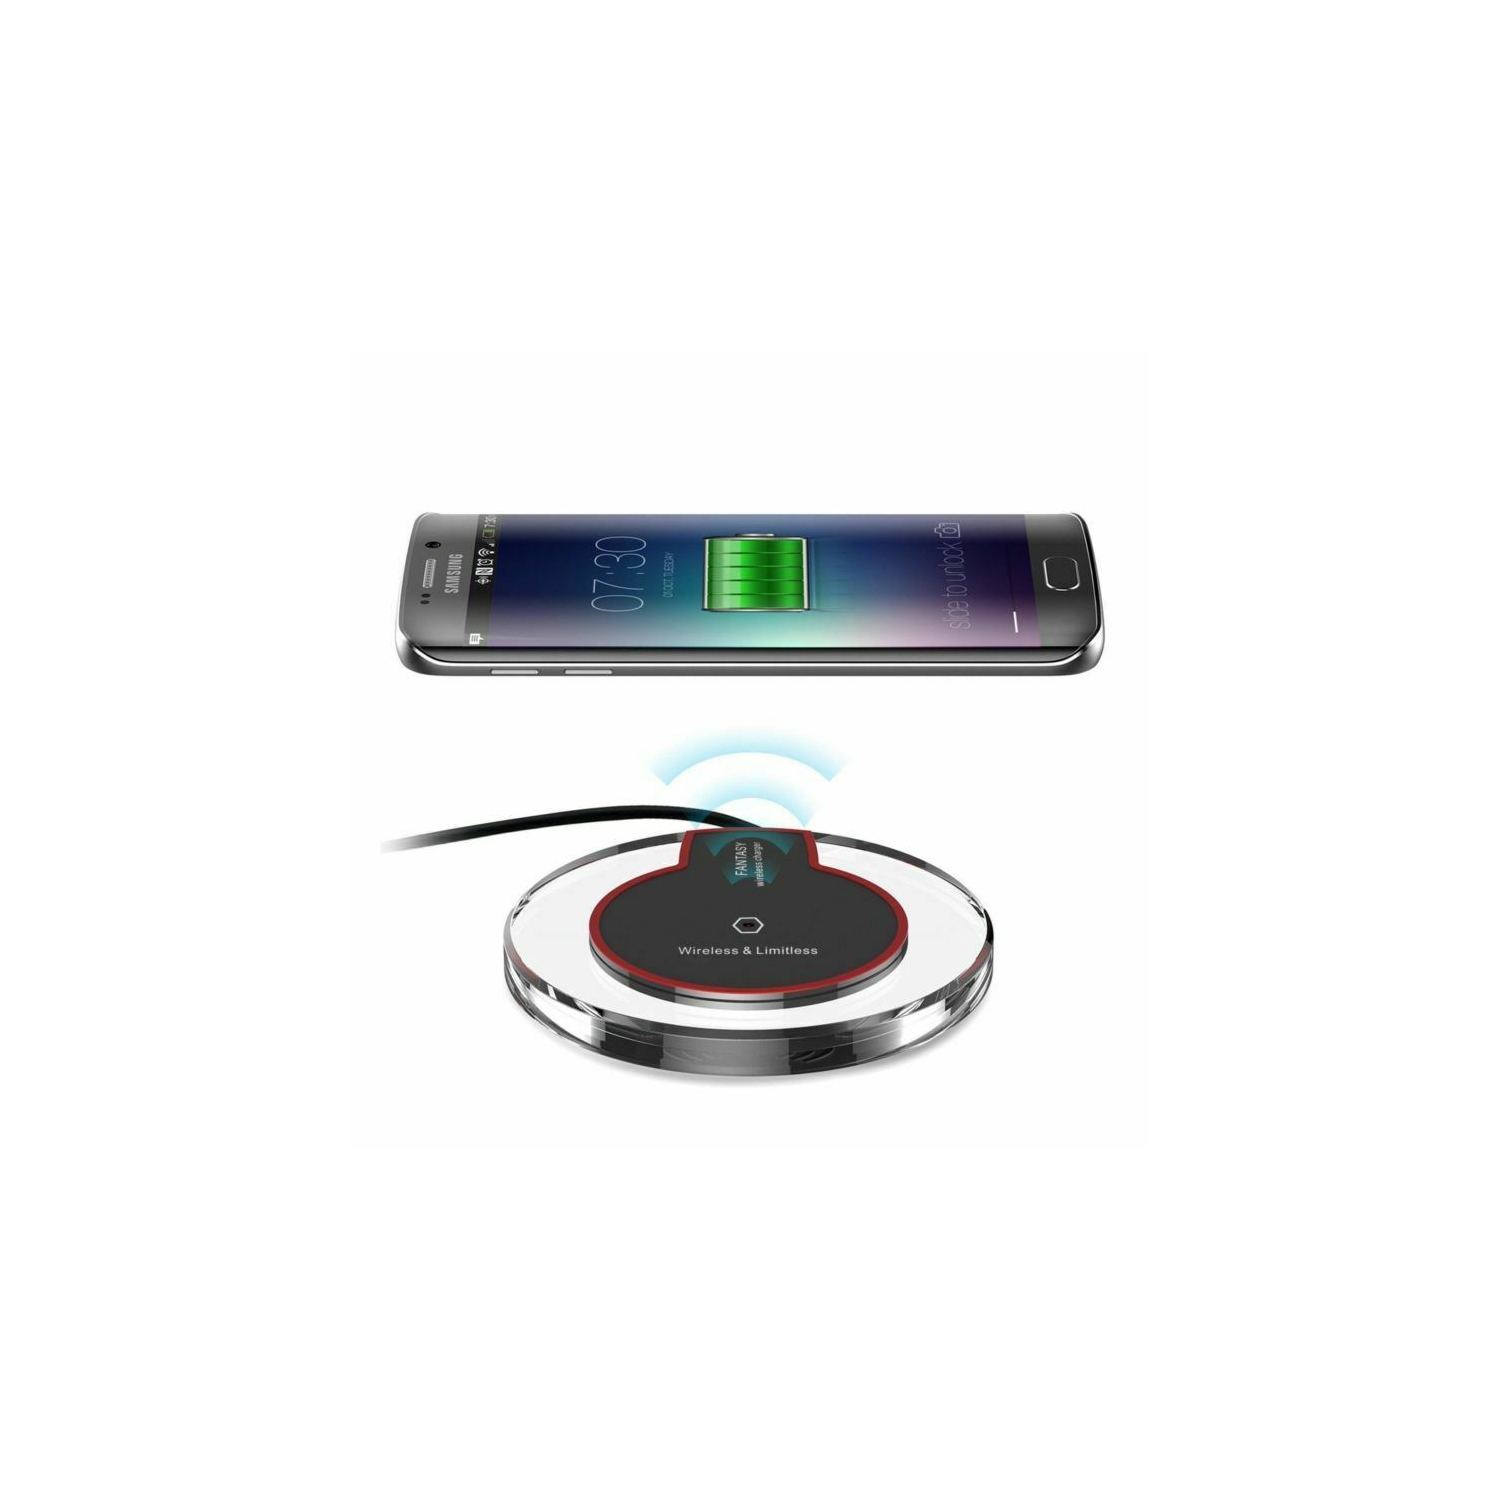 Qi Wireless Charger Slim Pad Ultrathin Fast Charging For iPhone Samsung LG Huawei (Black)